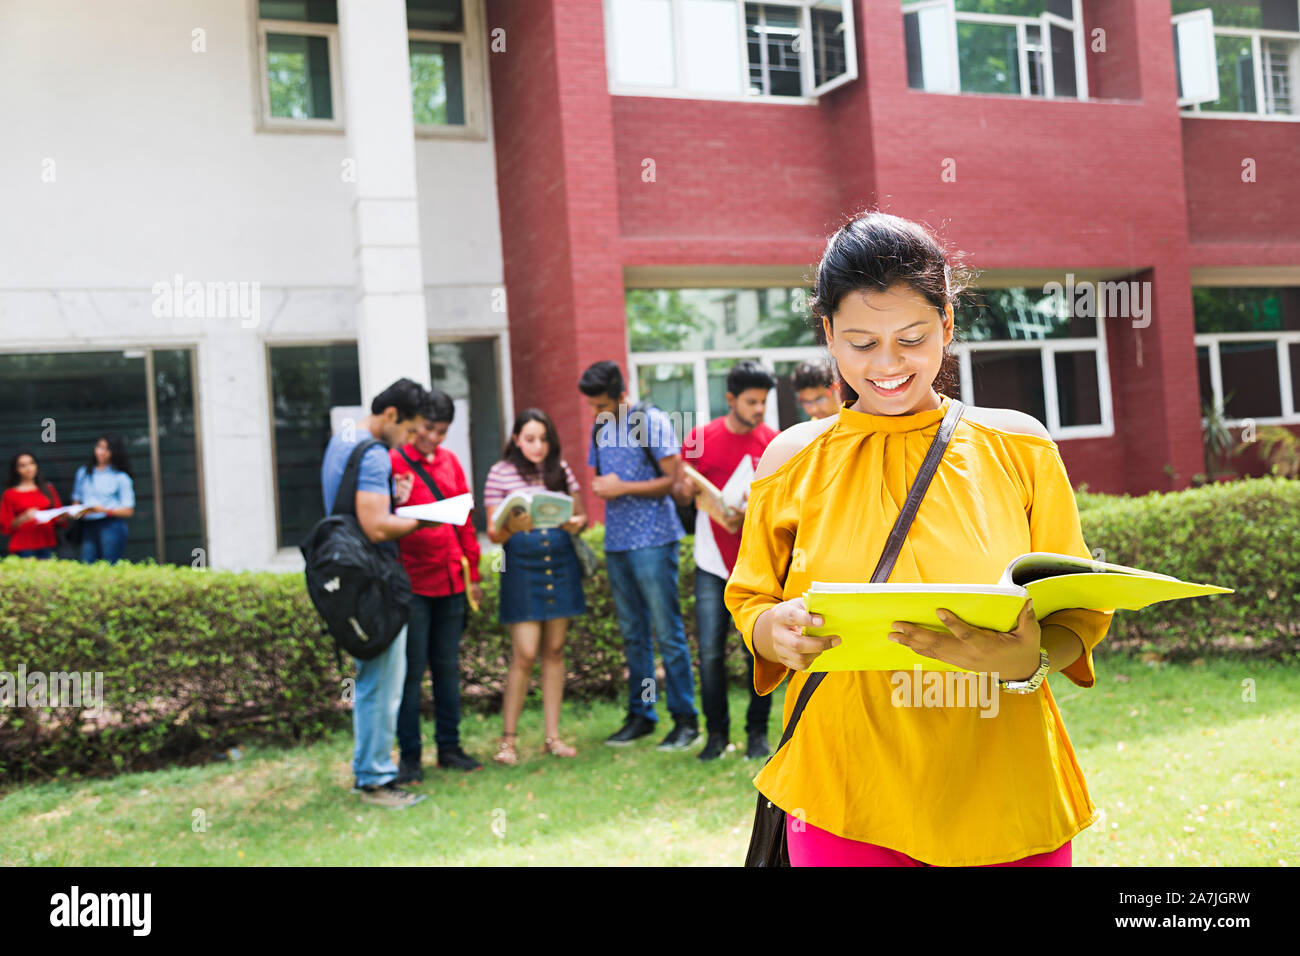 Teenager Girl College student reading book while friends standing in background at-college Campus Stock Photo